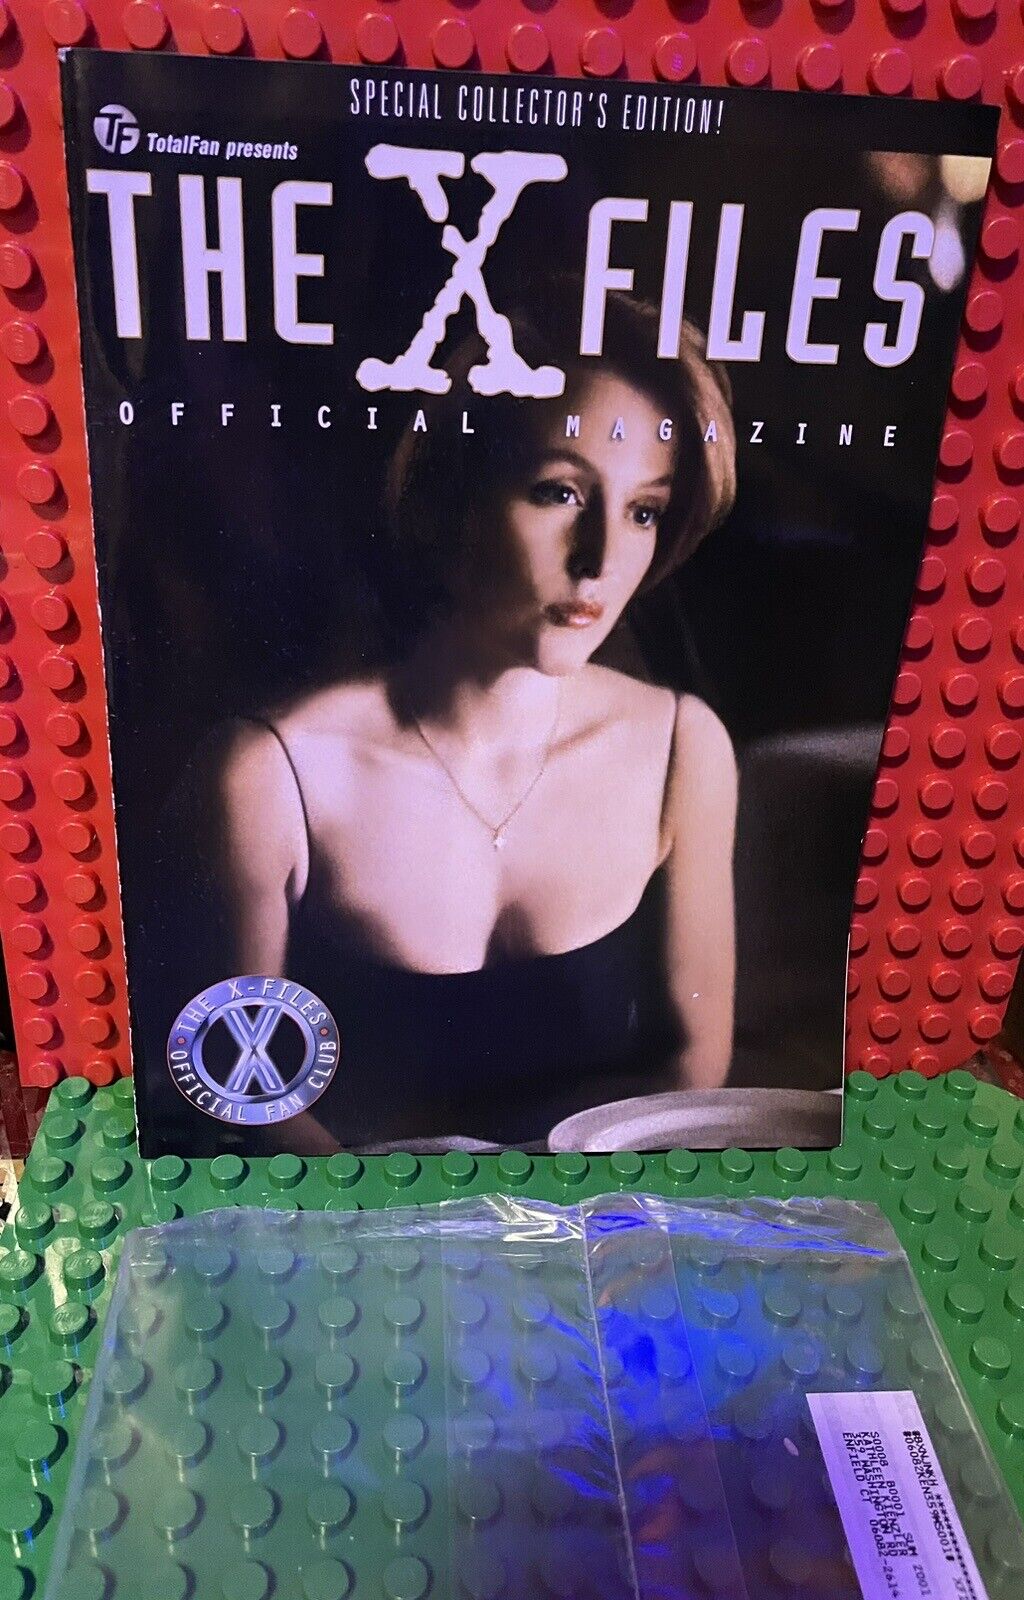 The X-Files Official Magazine Vol 4 No 3 Fan Club Collectors Edition W/ Shrink